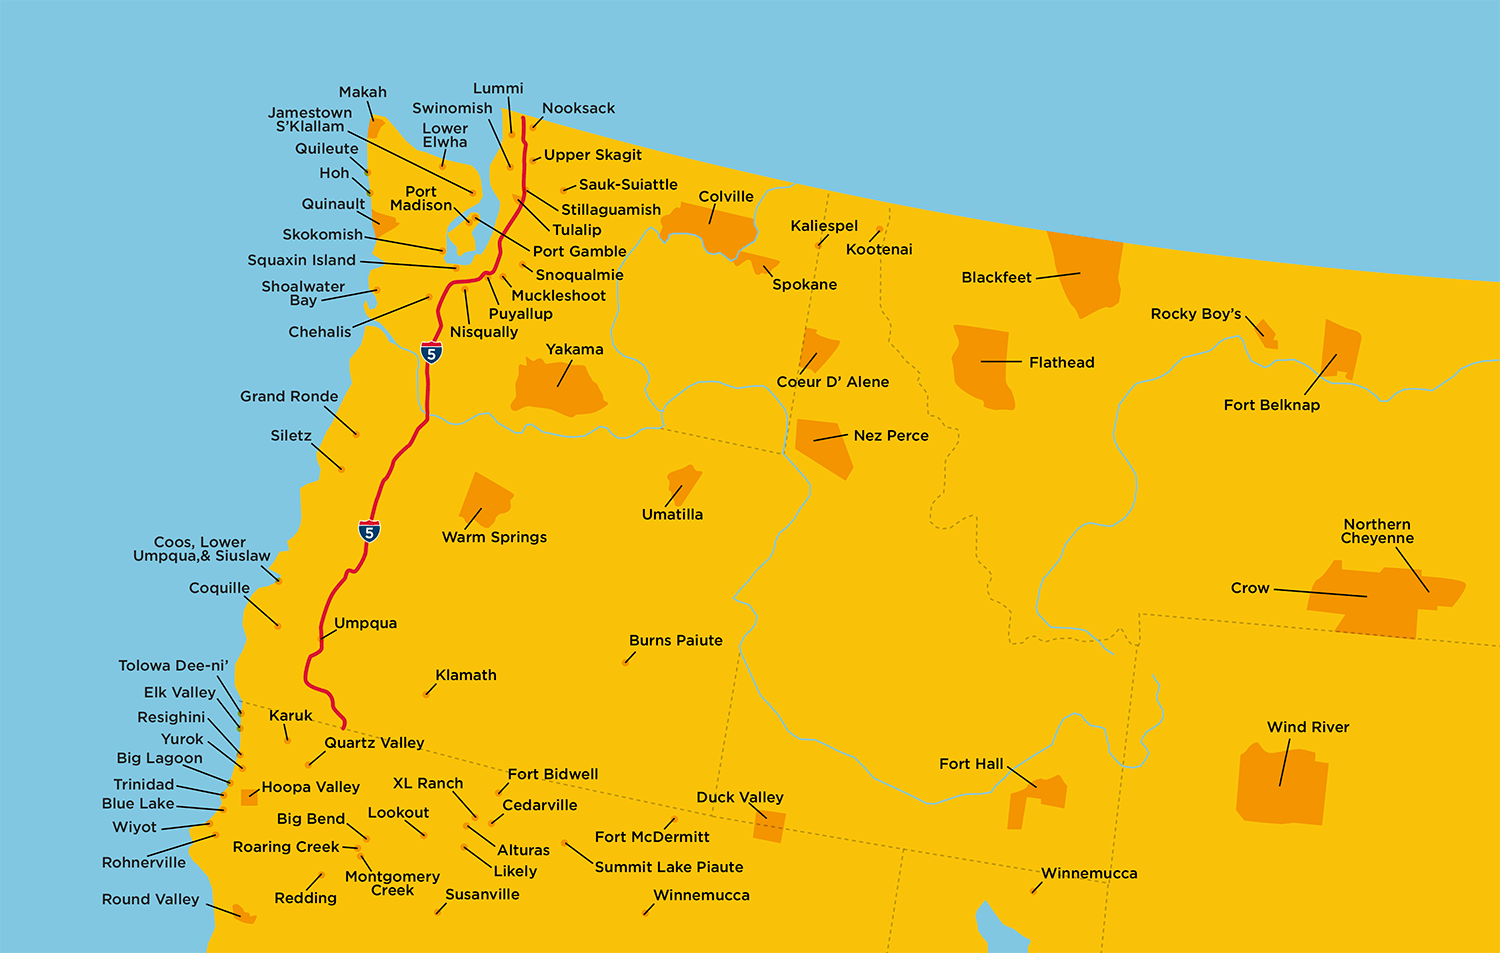 Tribes and Reservations Located in the Northwest